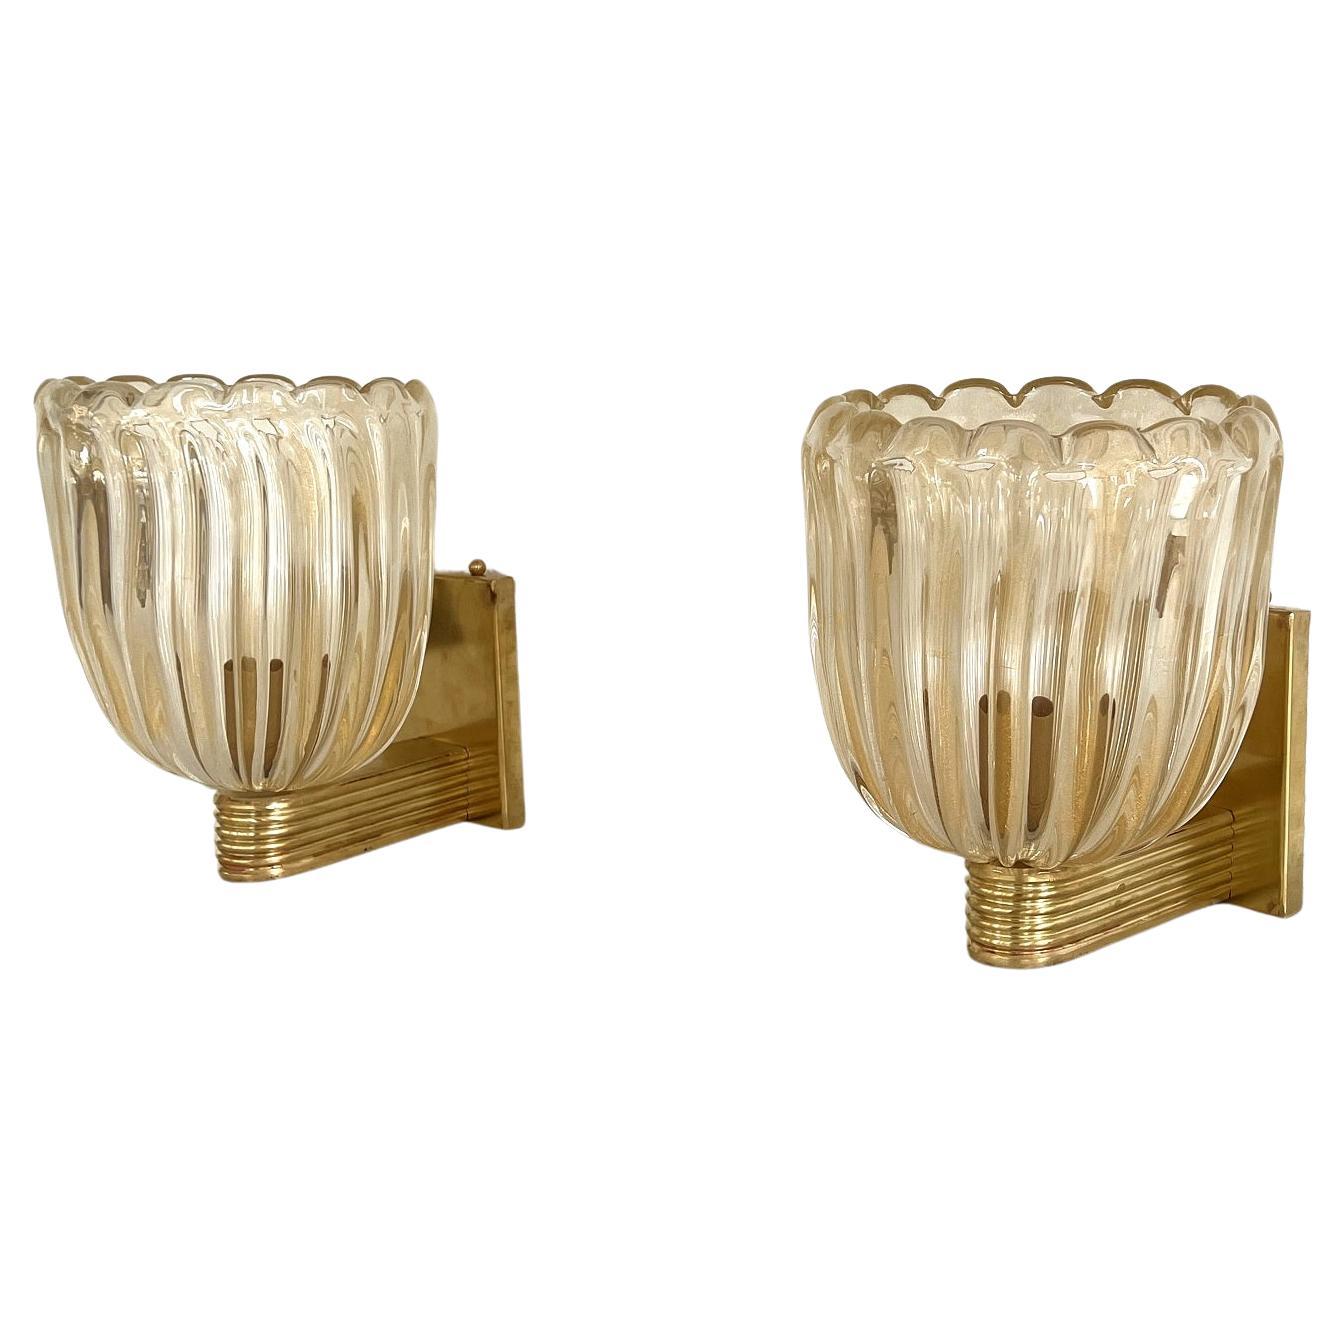 Italian Brass and Murano Glass Wall Lights or Sconces in Art Deco Style, 1990s For Sale